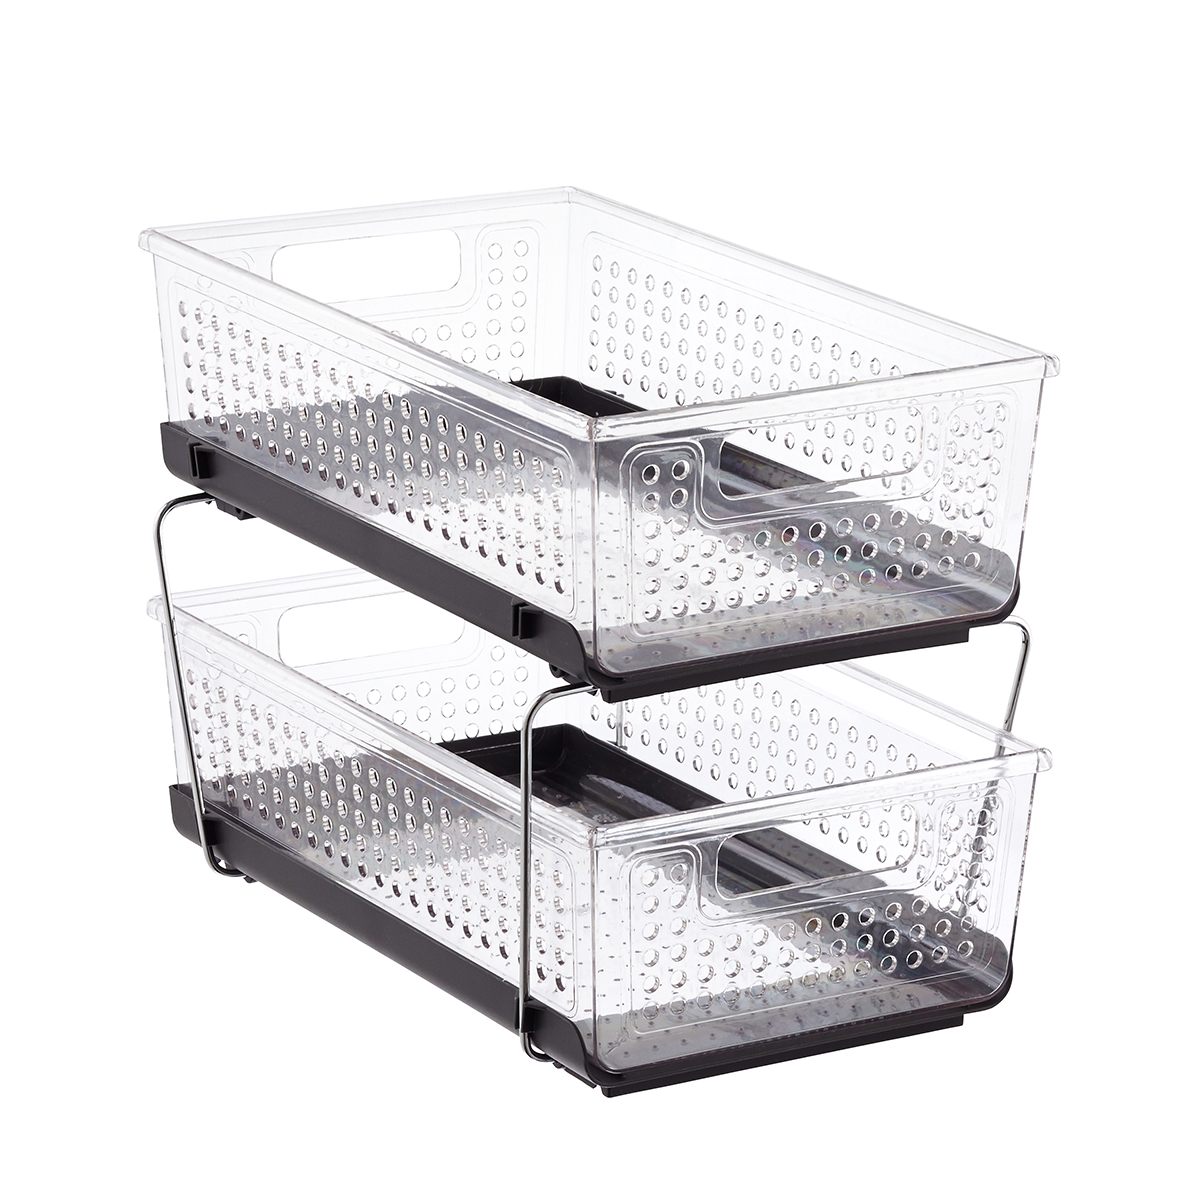 Madesmart 2-Tier Divided Organizer Clear/Grey, 9 x 14-1/2 x 10-5/8 H | The Container Store